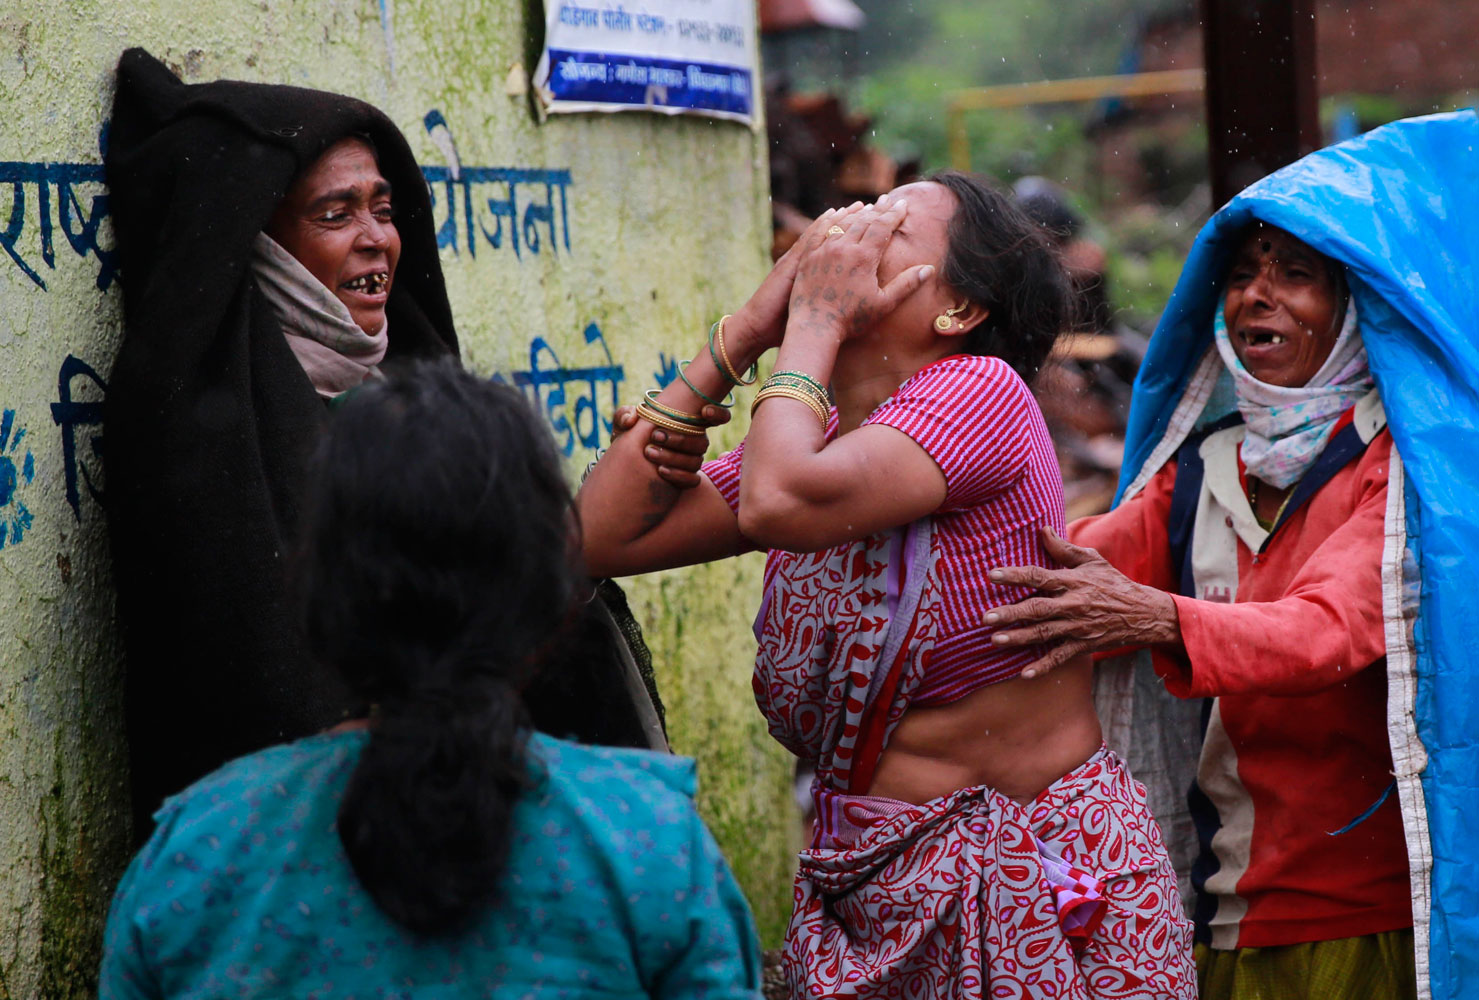 Relatives wail after seeing the body of a victim after a massive landslide in Malin village in Pune district of western Maharashtra state, India on July 31, 2014.